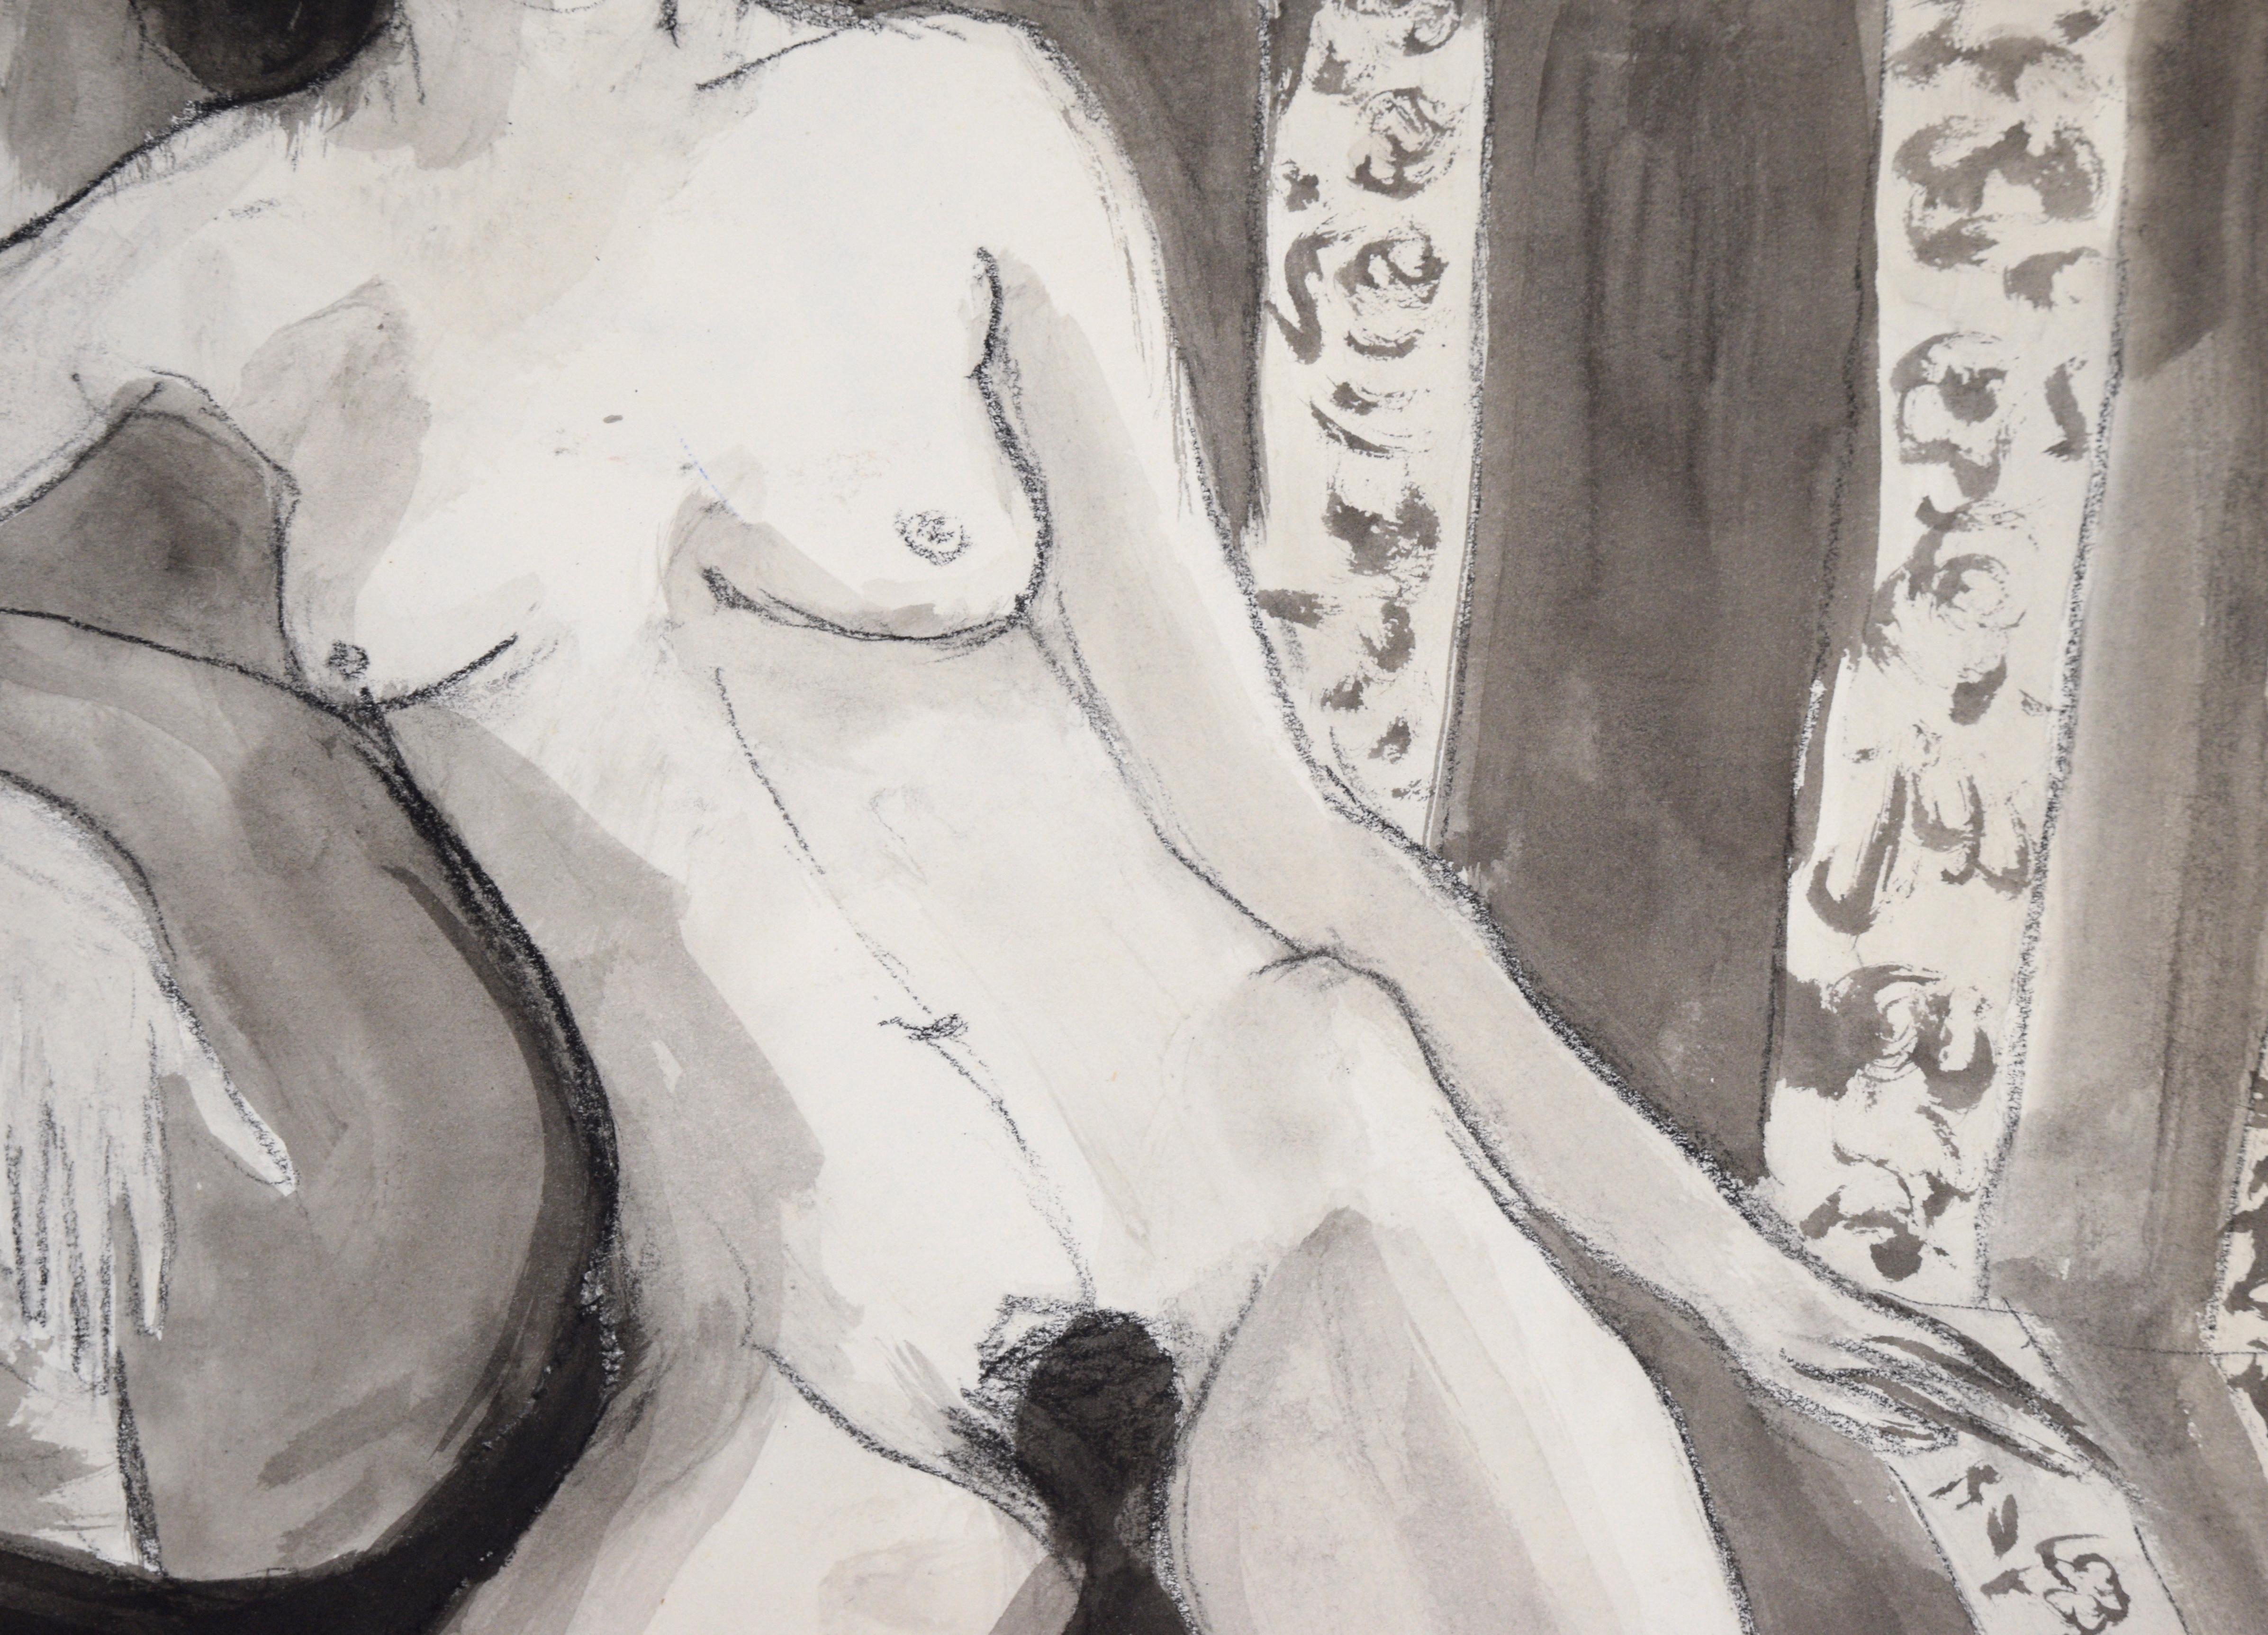 Nude Woman on Striped Chair #2 in Charcoal and Gouache on Paper - Contemporary Painting by Katherine Kallick